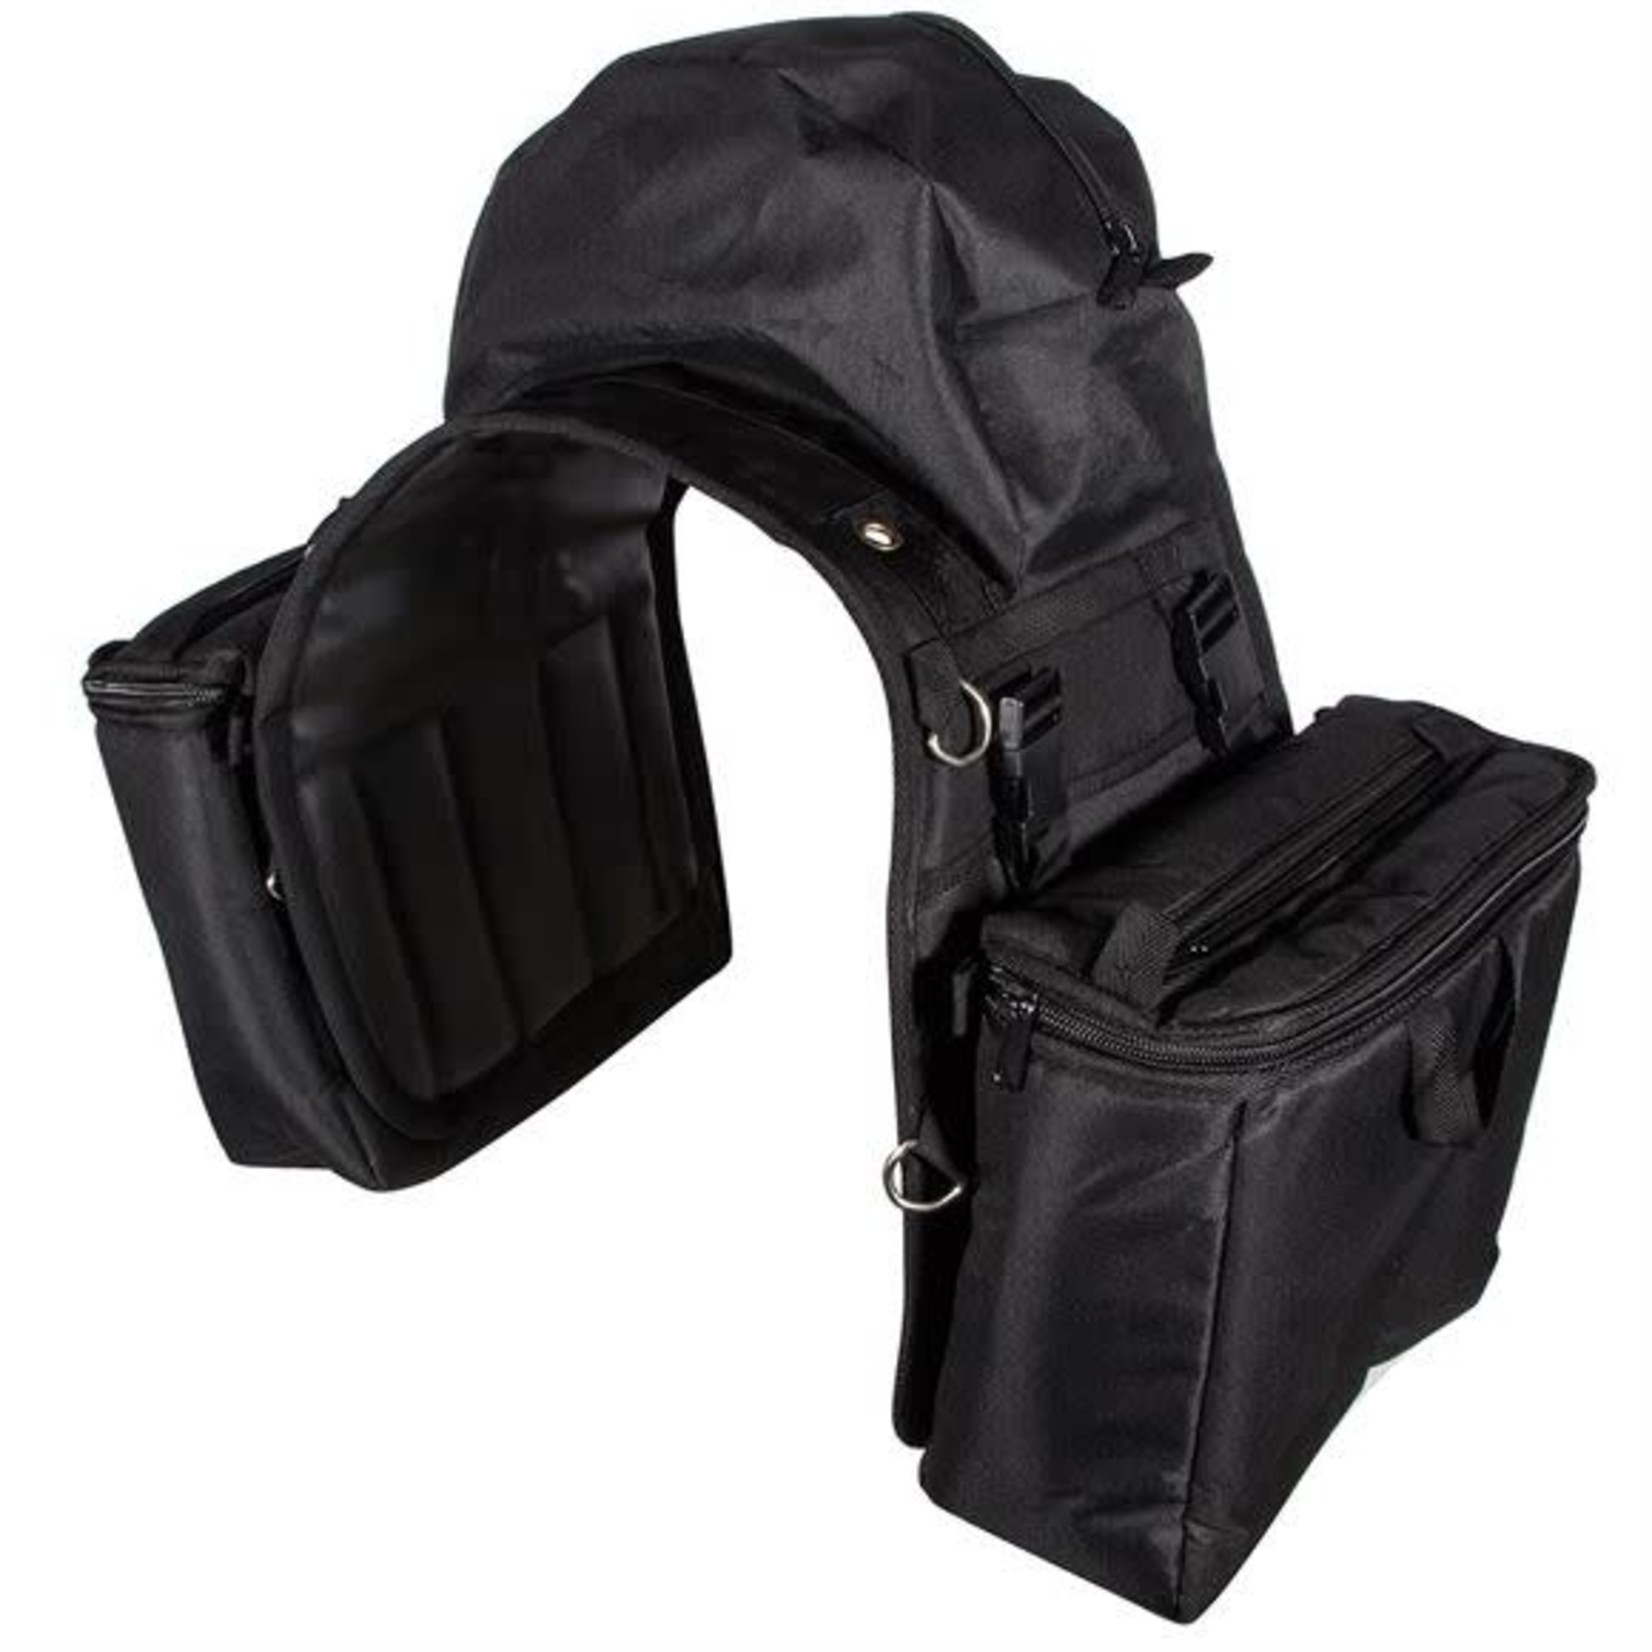 Insulated Detachable Saddle Bag with Cantle Bag